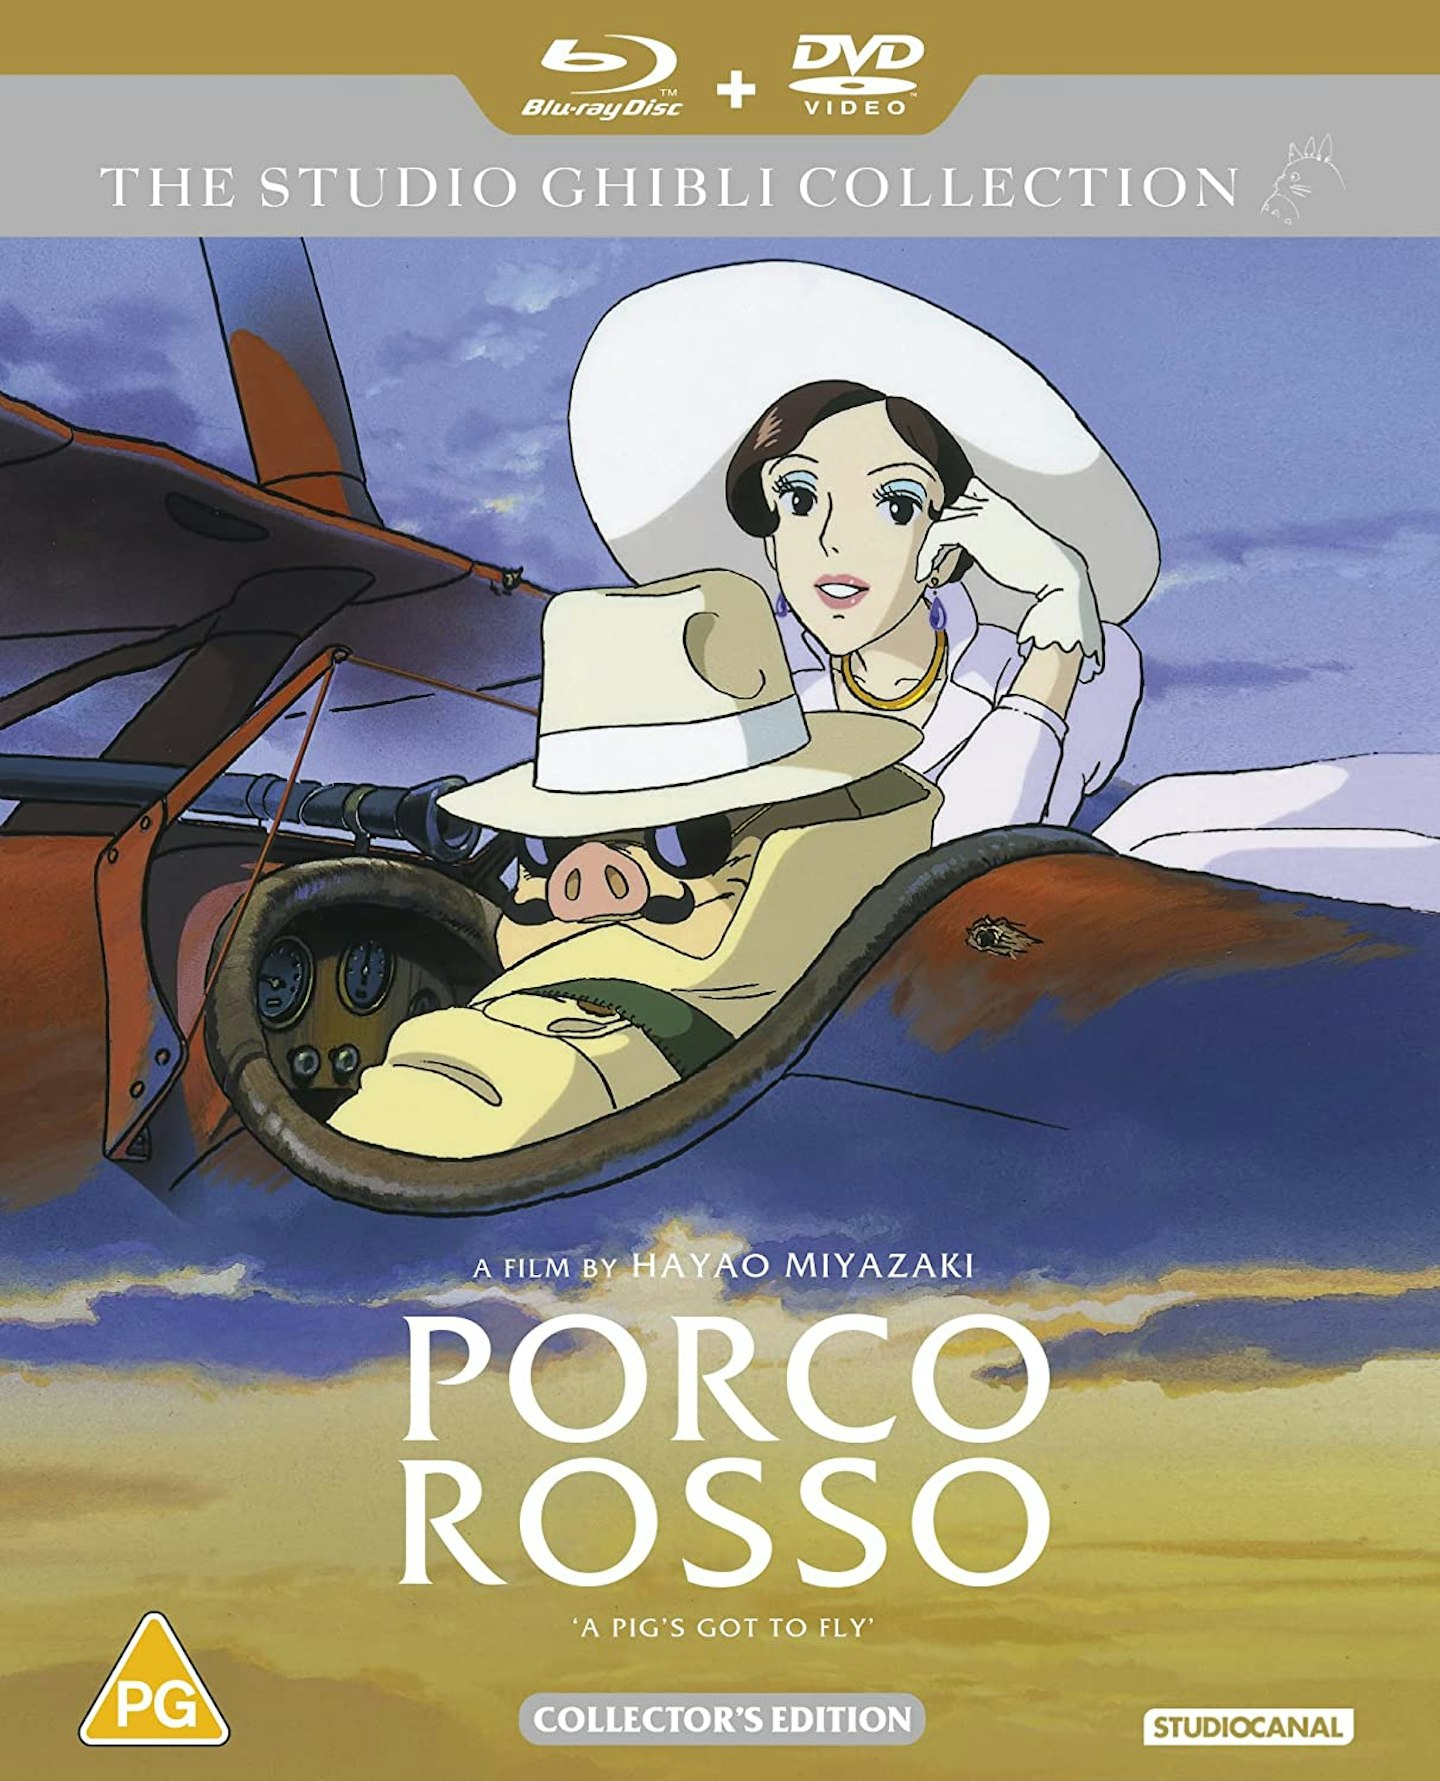 Porco Rosso Collector's Edition